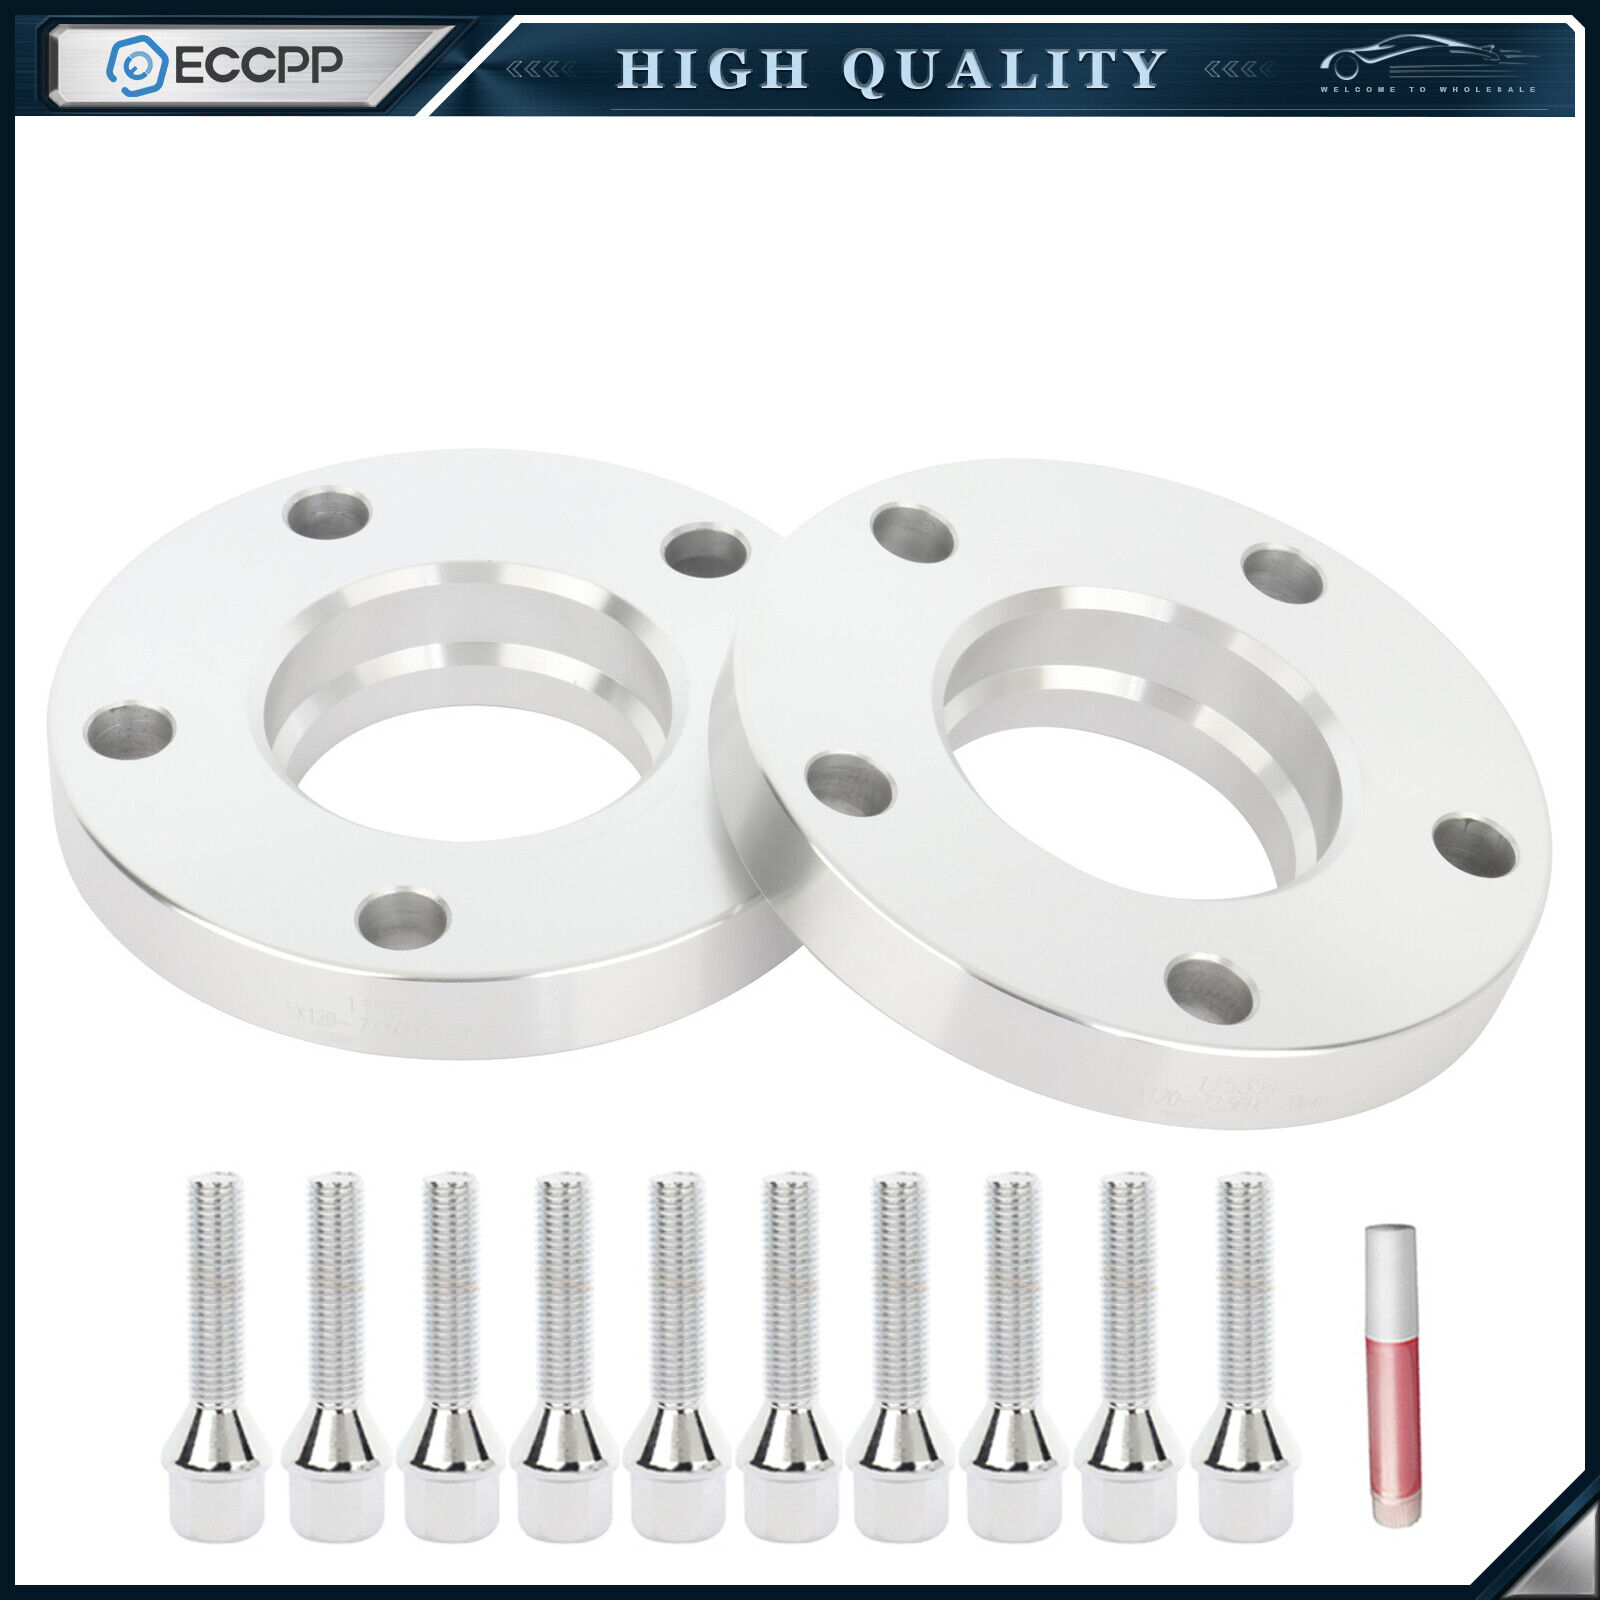 ECCPP (2) 20mm Hubcentric Wheel Spacers 5x120 12x1.5 For BMW 325i 325xi 328i M3